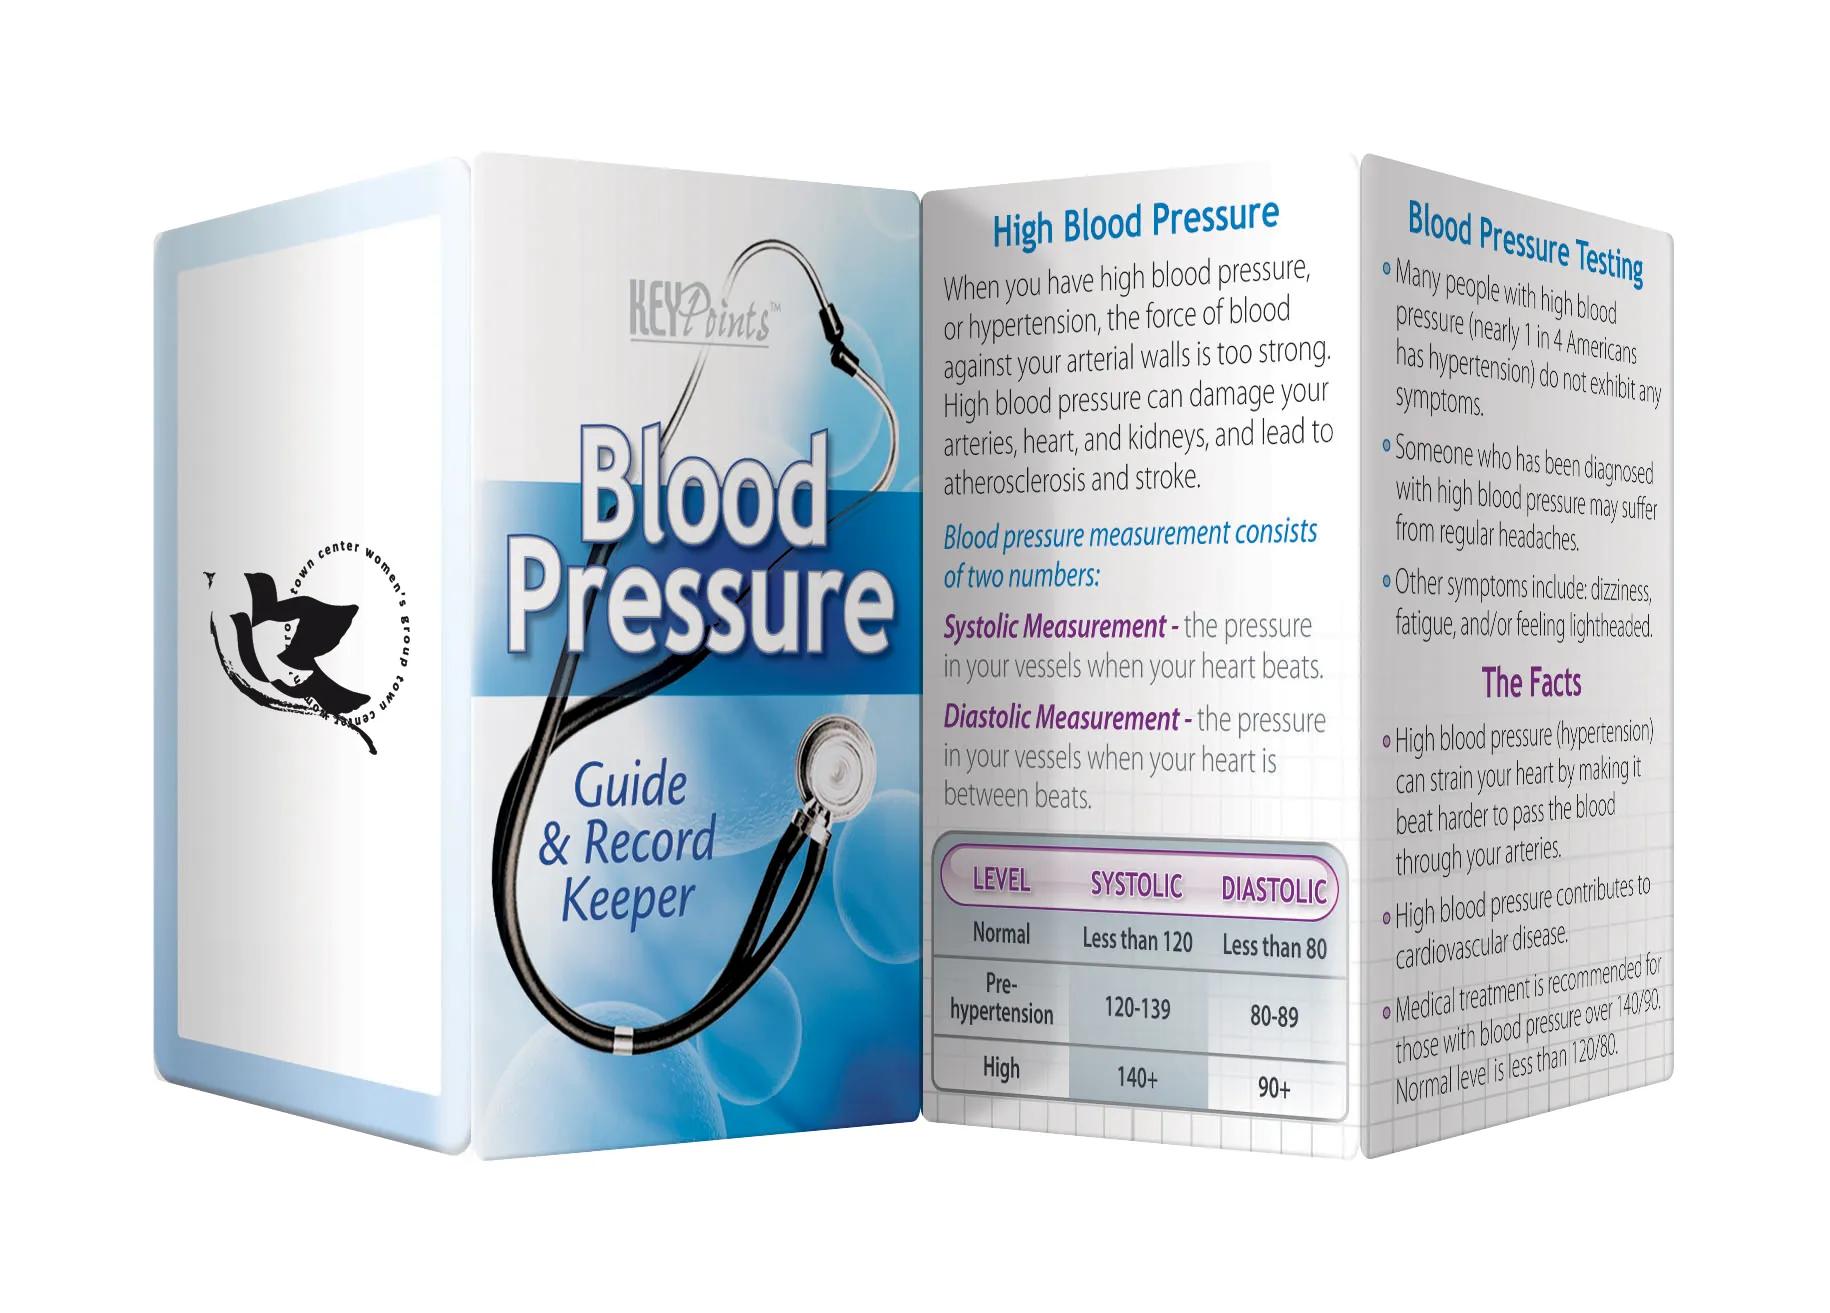 Key Point: Blood Pressure - Guide & Record Keeper 5 of 6